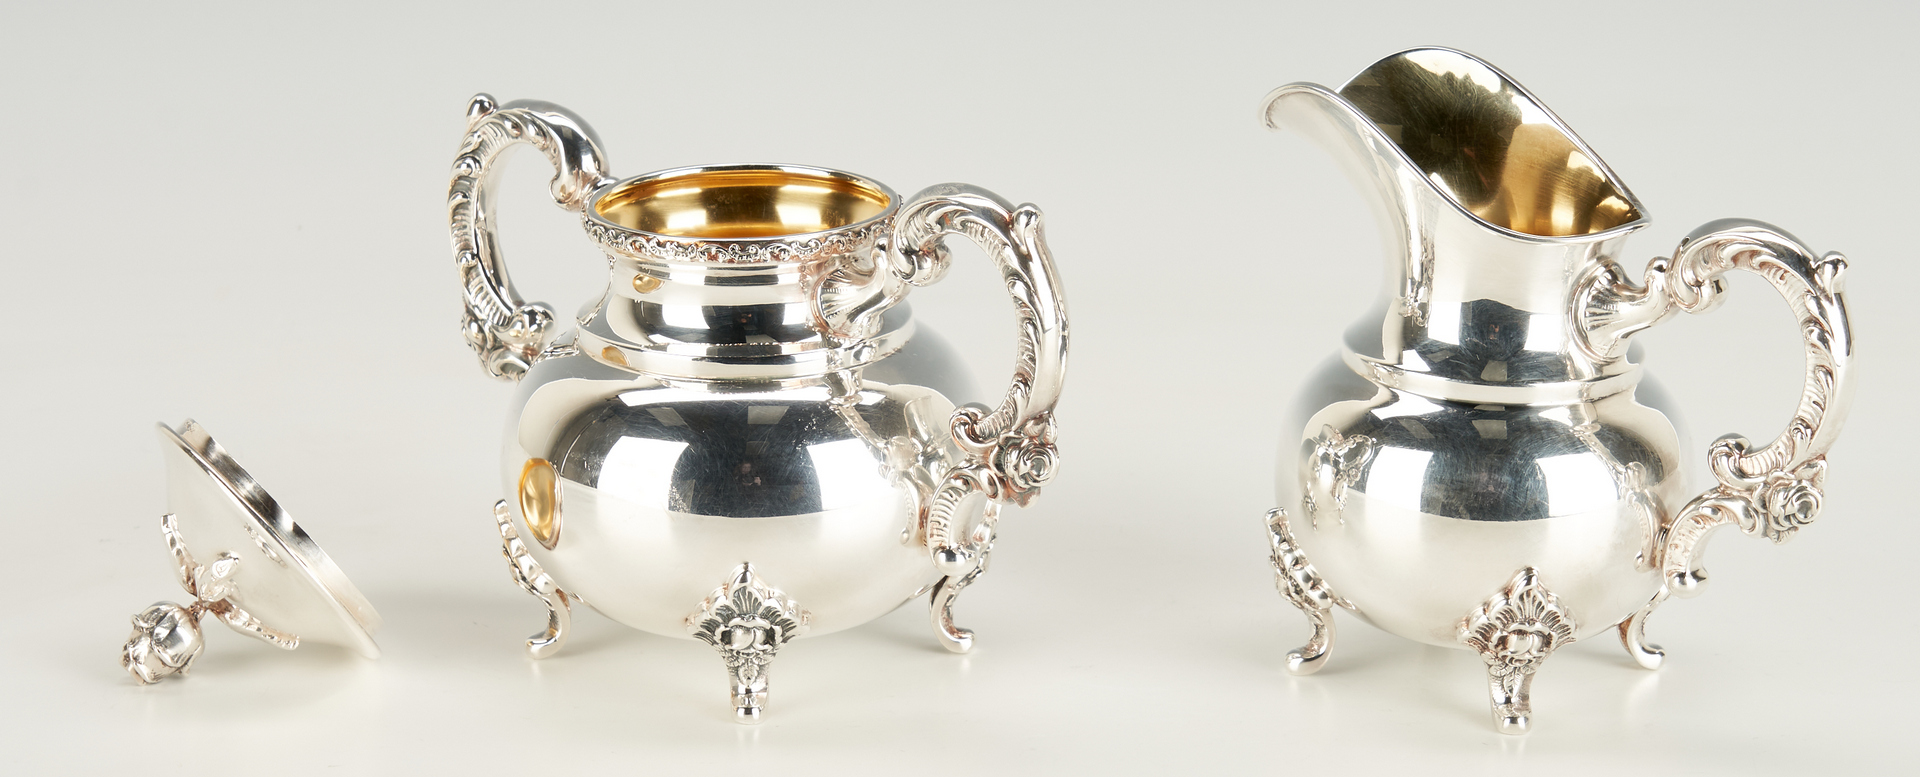 Lot 35: Emil Hermann Sterling Silver Tea Set plus shakers, fork, and tray